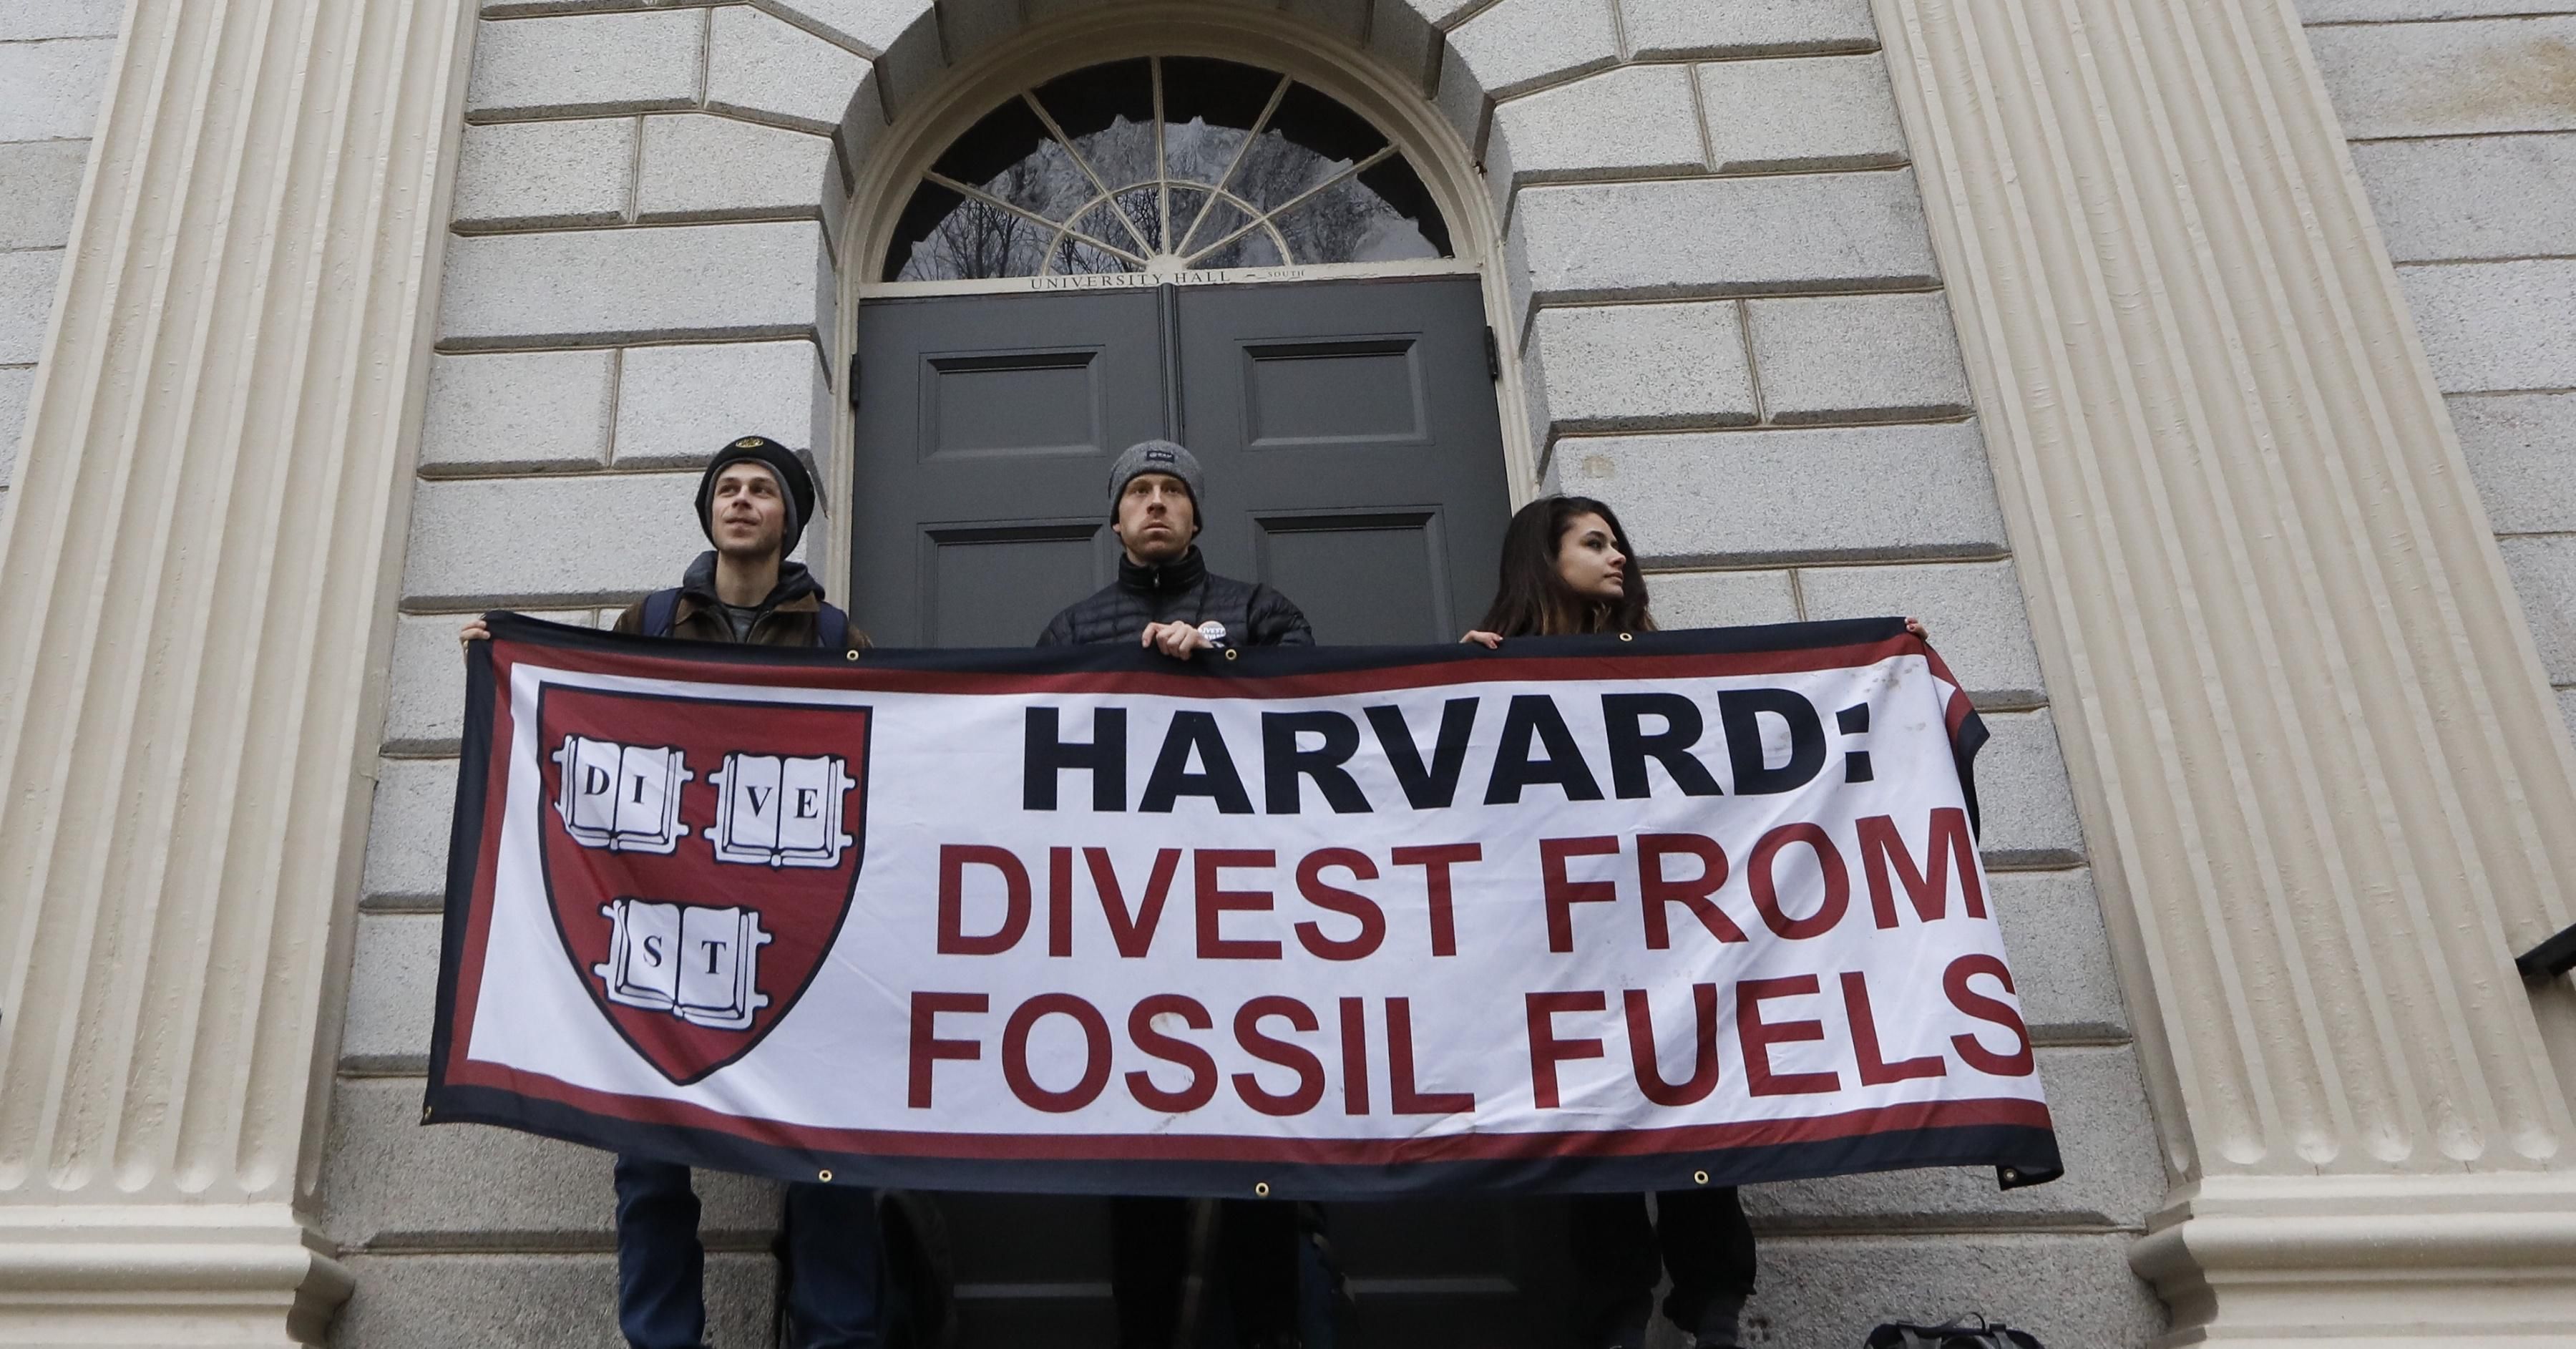 Students demanding that Harvard University divest from fossil fuels block the entrance to University Hall on the school's campus in Cambridge, MA on March 28, 2017. (Photo: Keith Bedford/The Boston Globe via Getty Images)